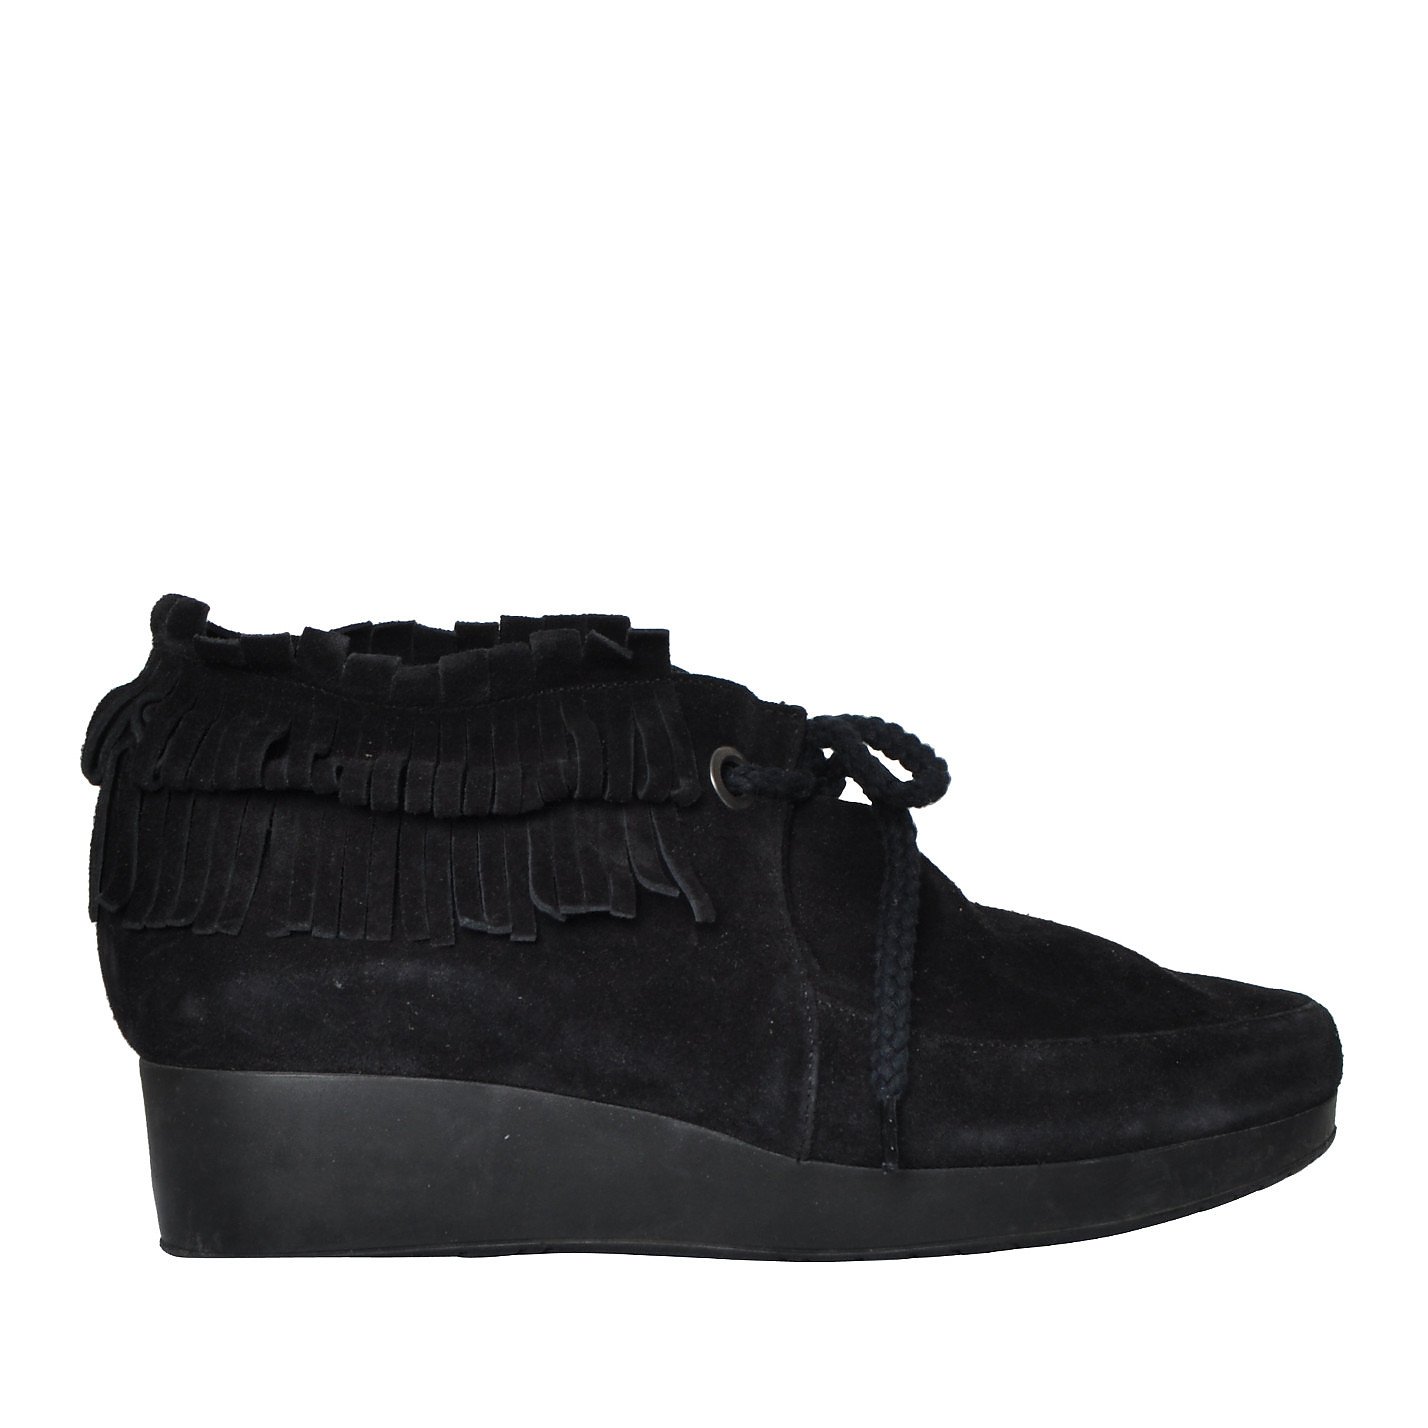 Robert Clergerie Fringed Suede Ankle Boots